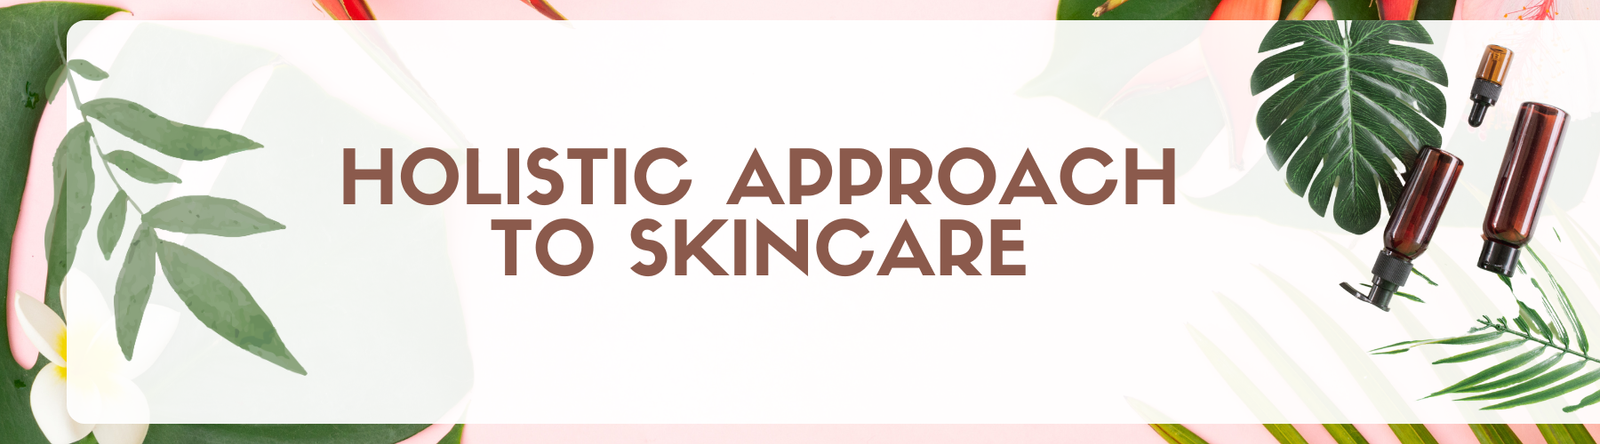 Nurturing Radiance: The Holistic Approach to Skincare